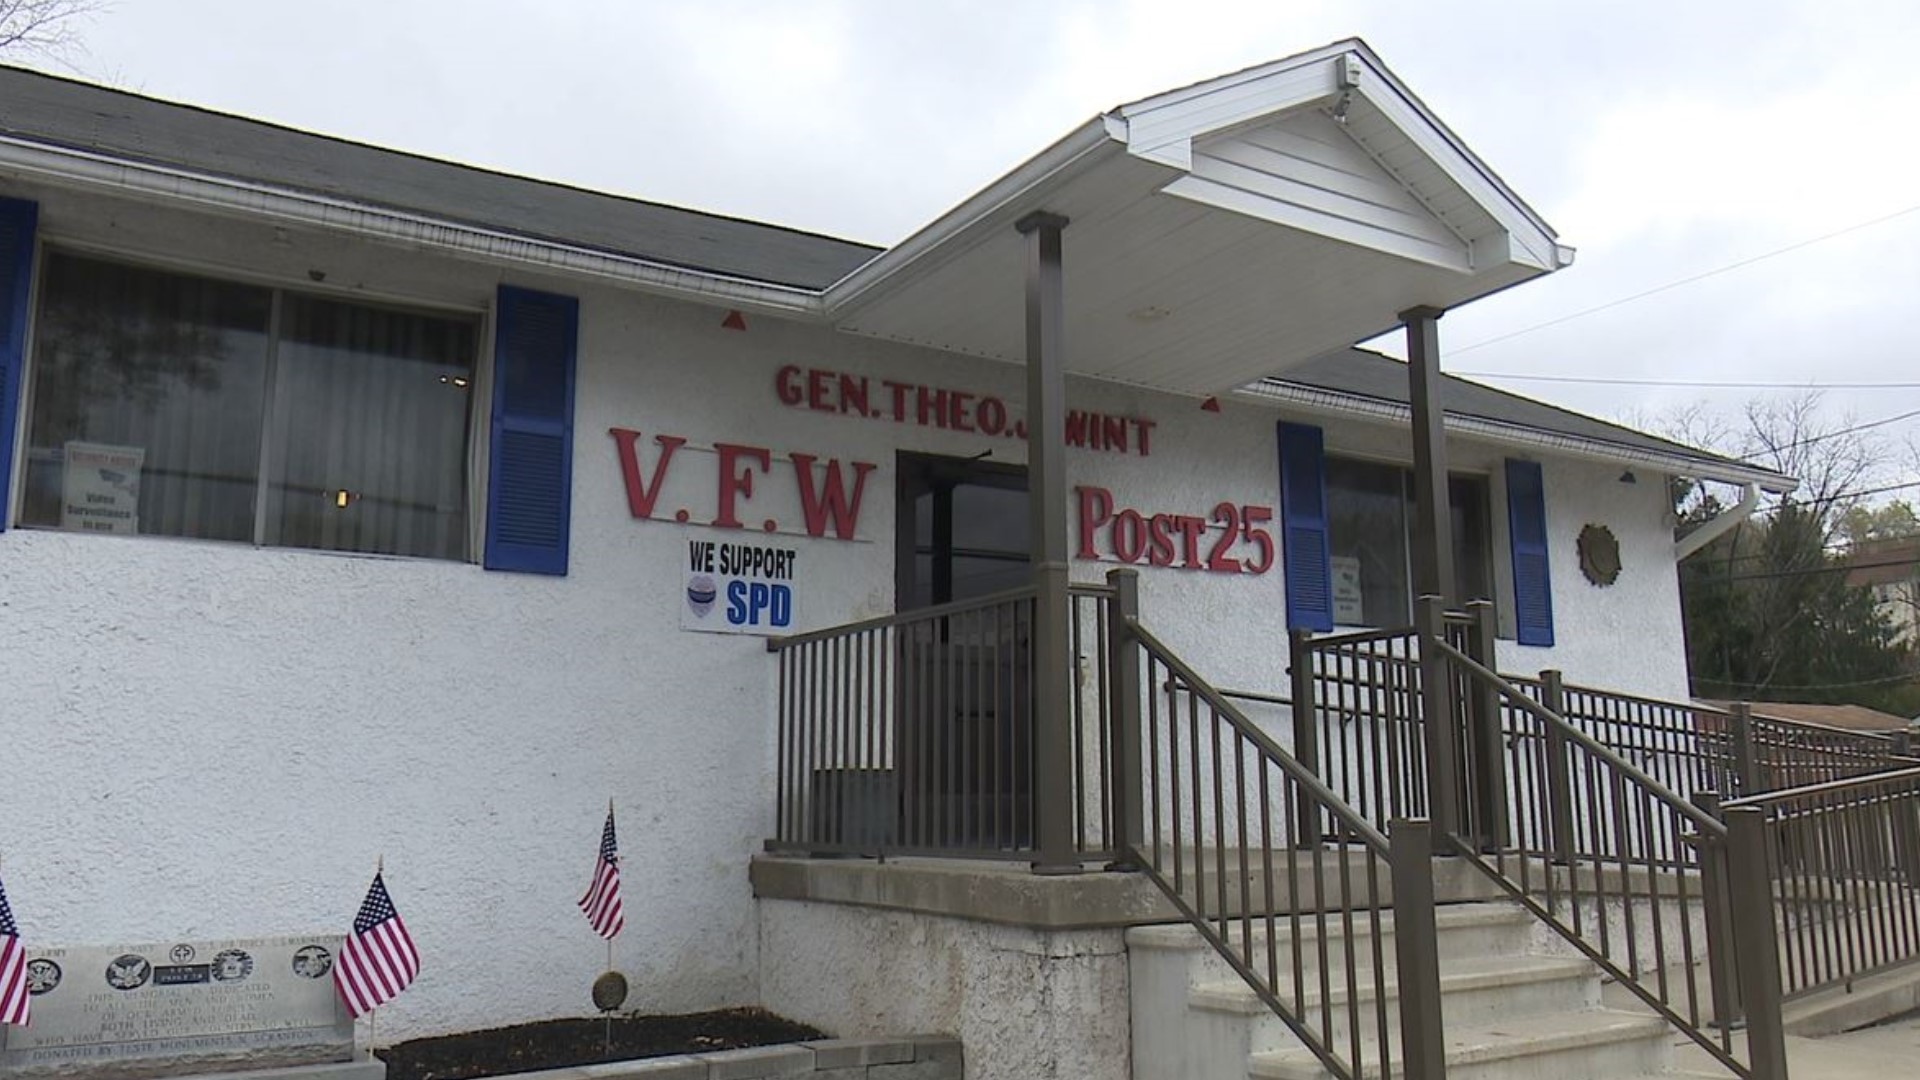 The commander of VFW Post 25 says he's recently recruited new members who served in Iraq and Afghanistan. He says it's a rare feat to get younger vets involved.